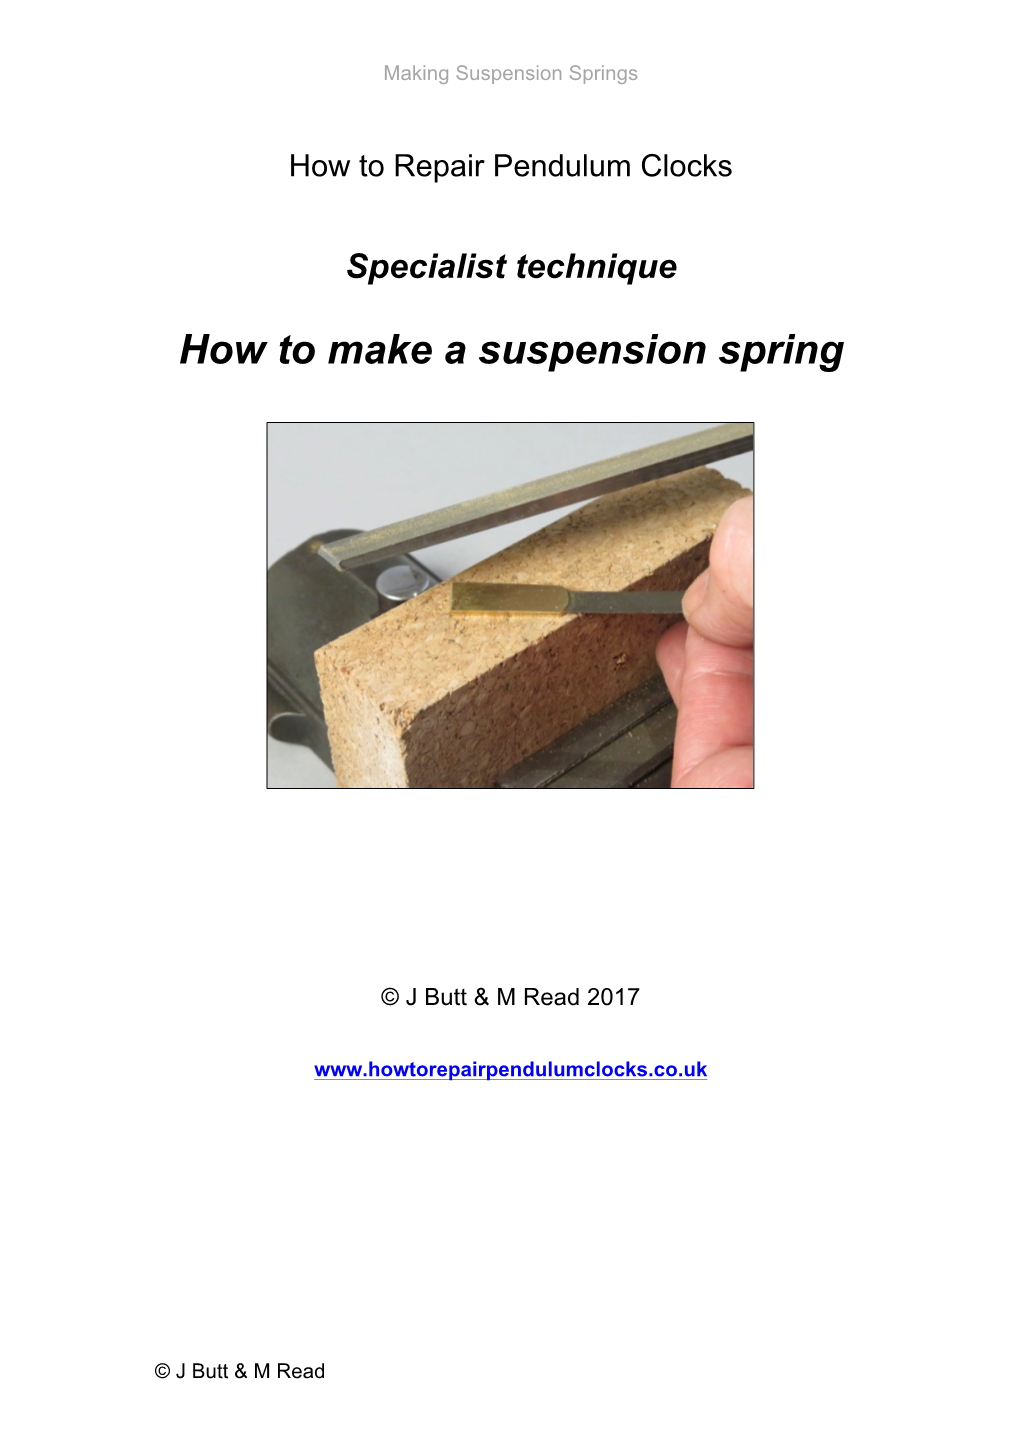 How to Make a Suspension Spring